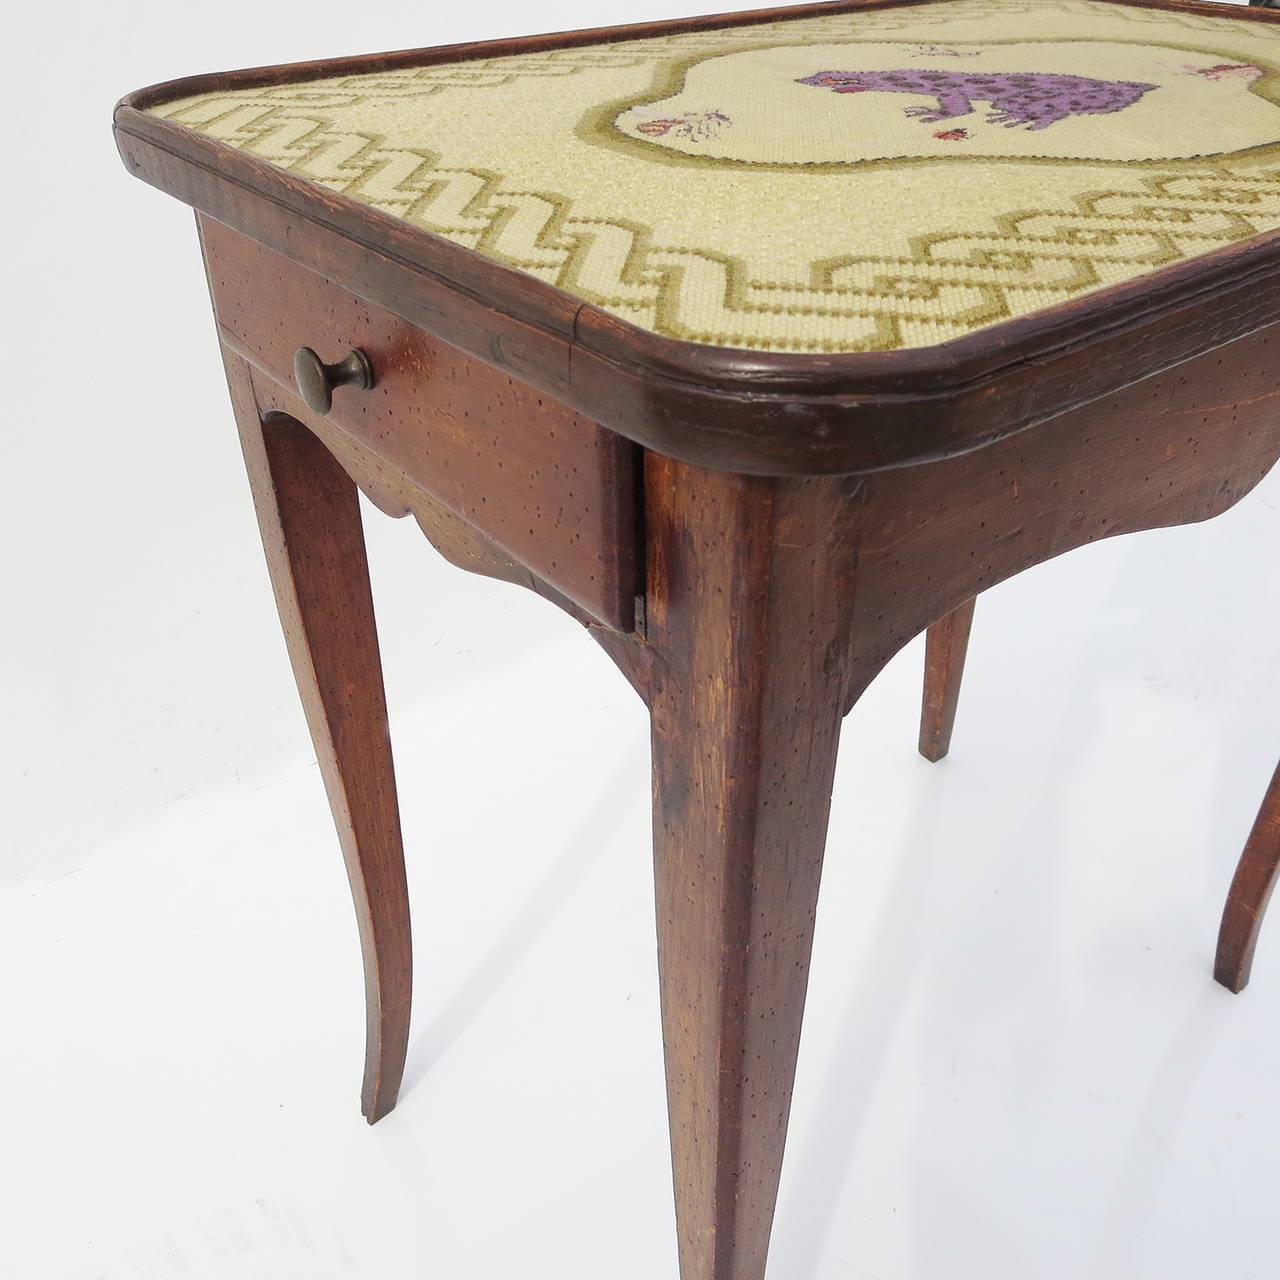 Early 20th Century Empire Occasional Table with Embroidery Top